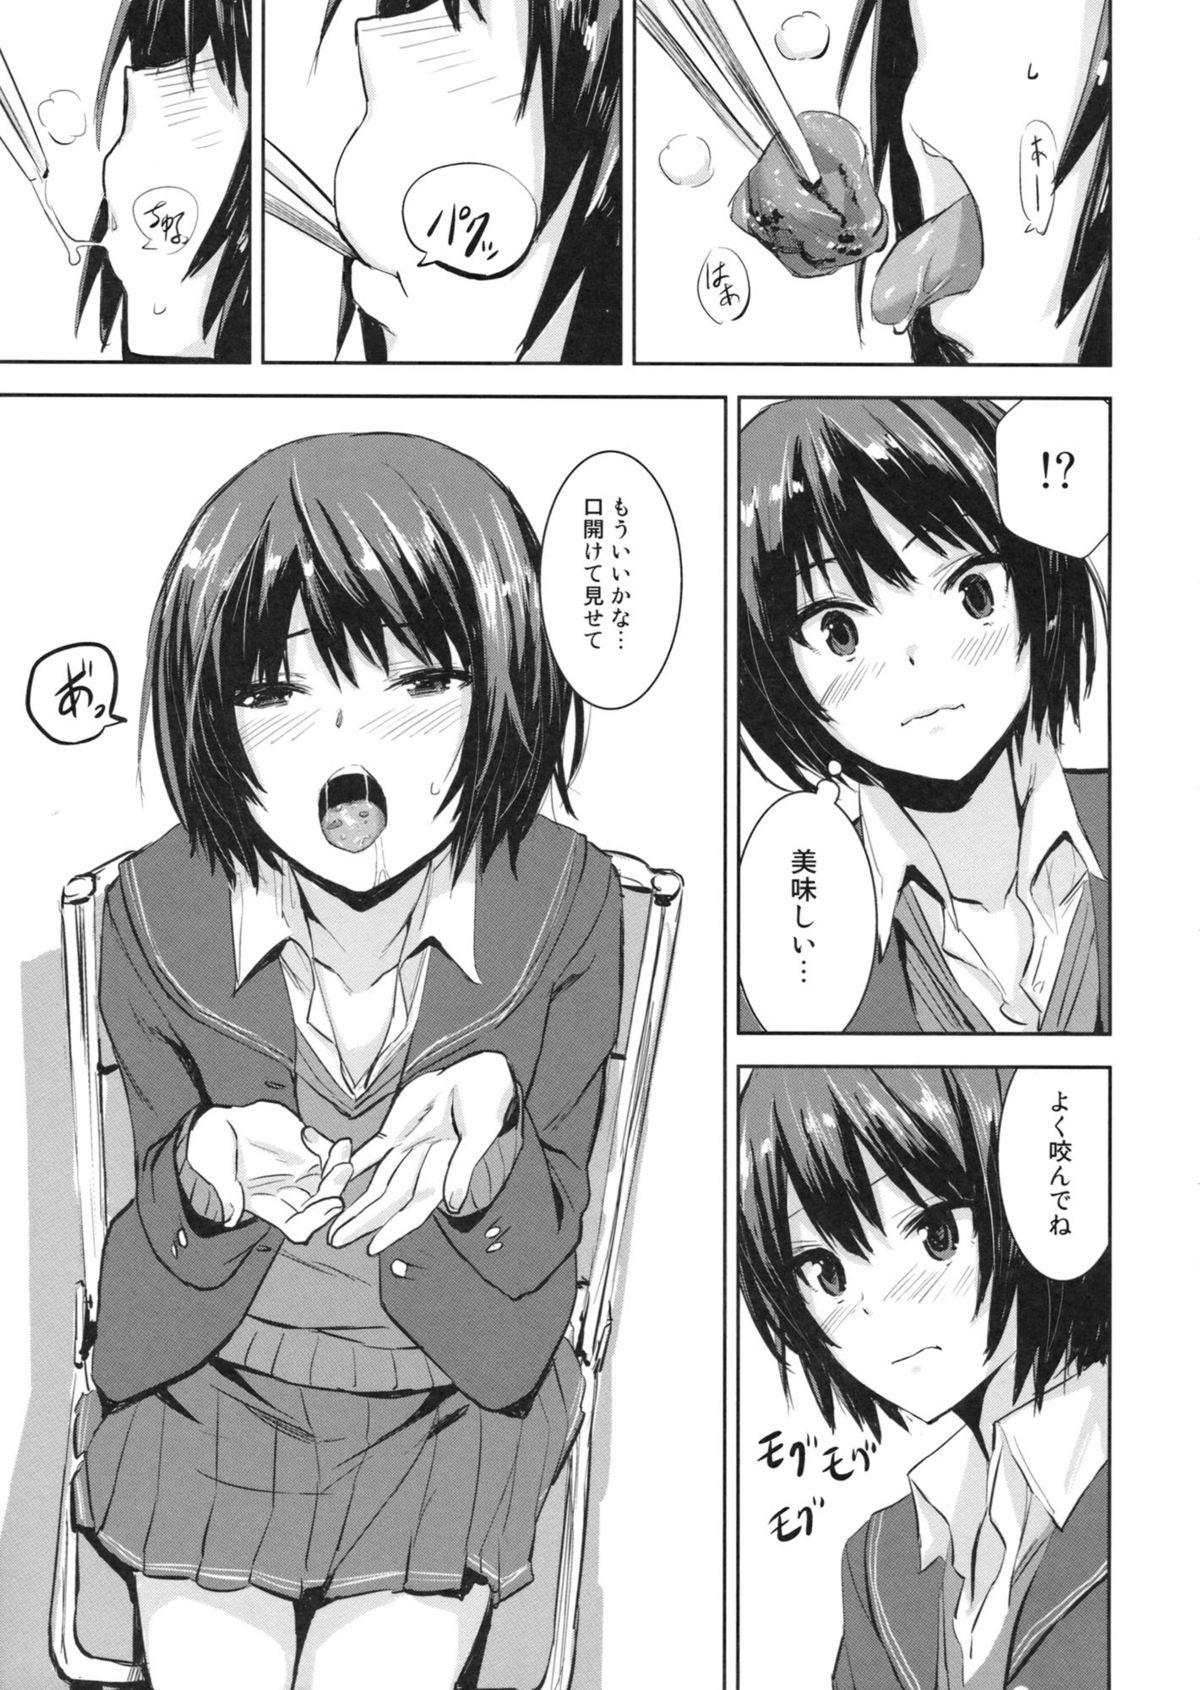 Doctor Cloudy See's - Amagami Best Blowjob - Page 4